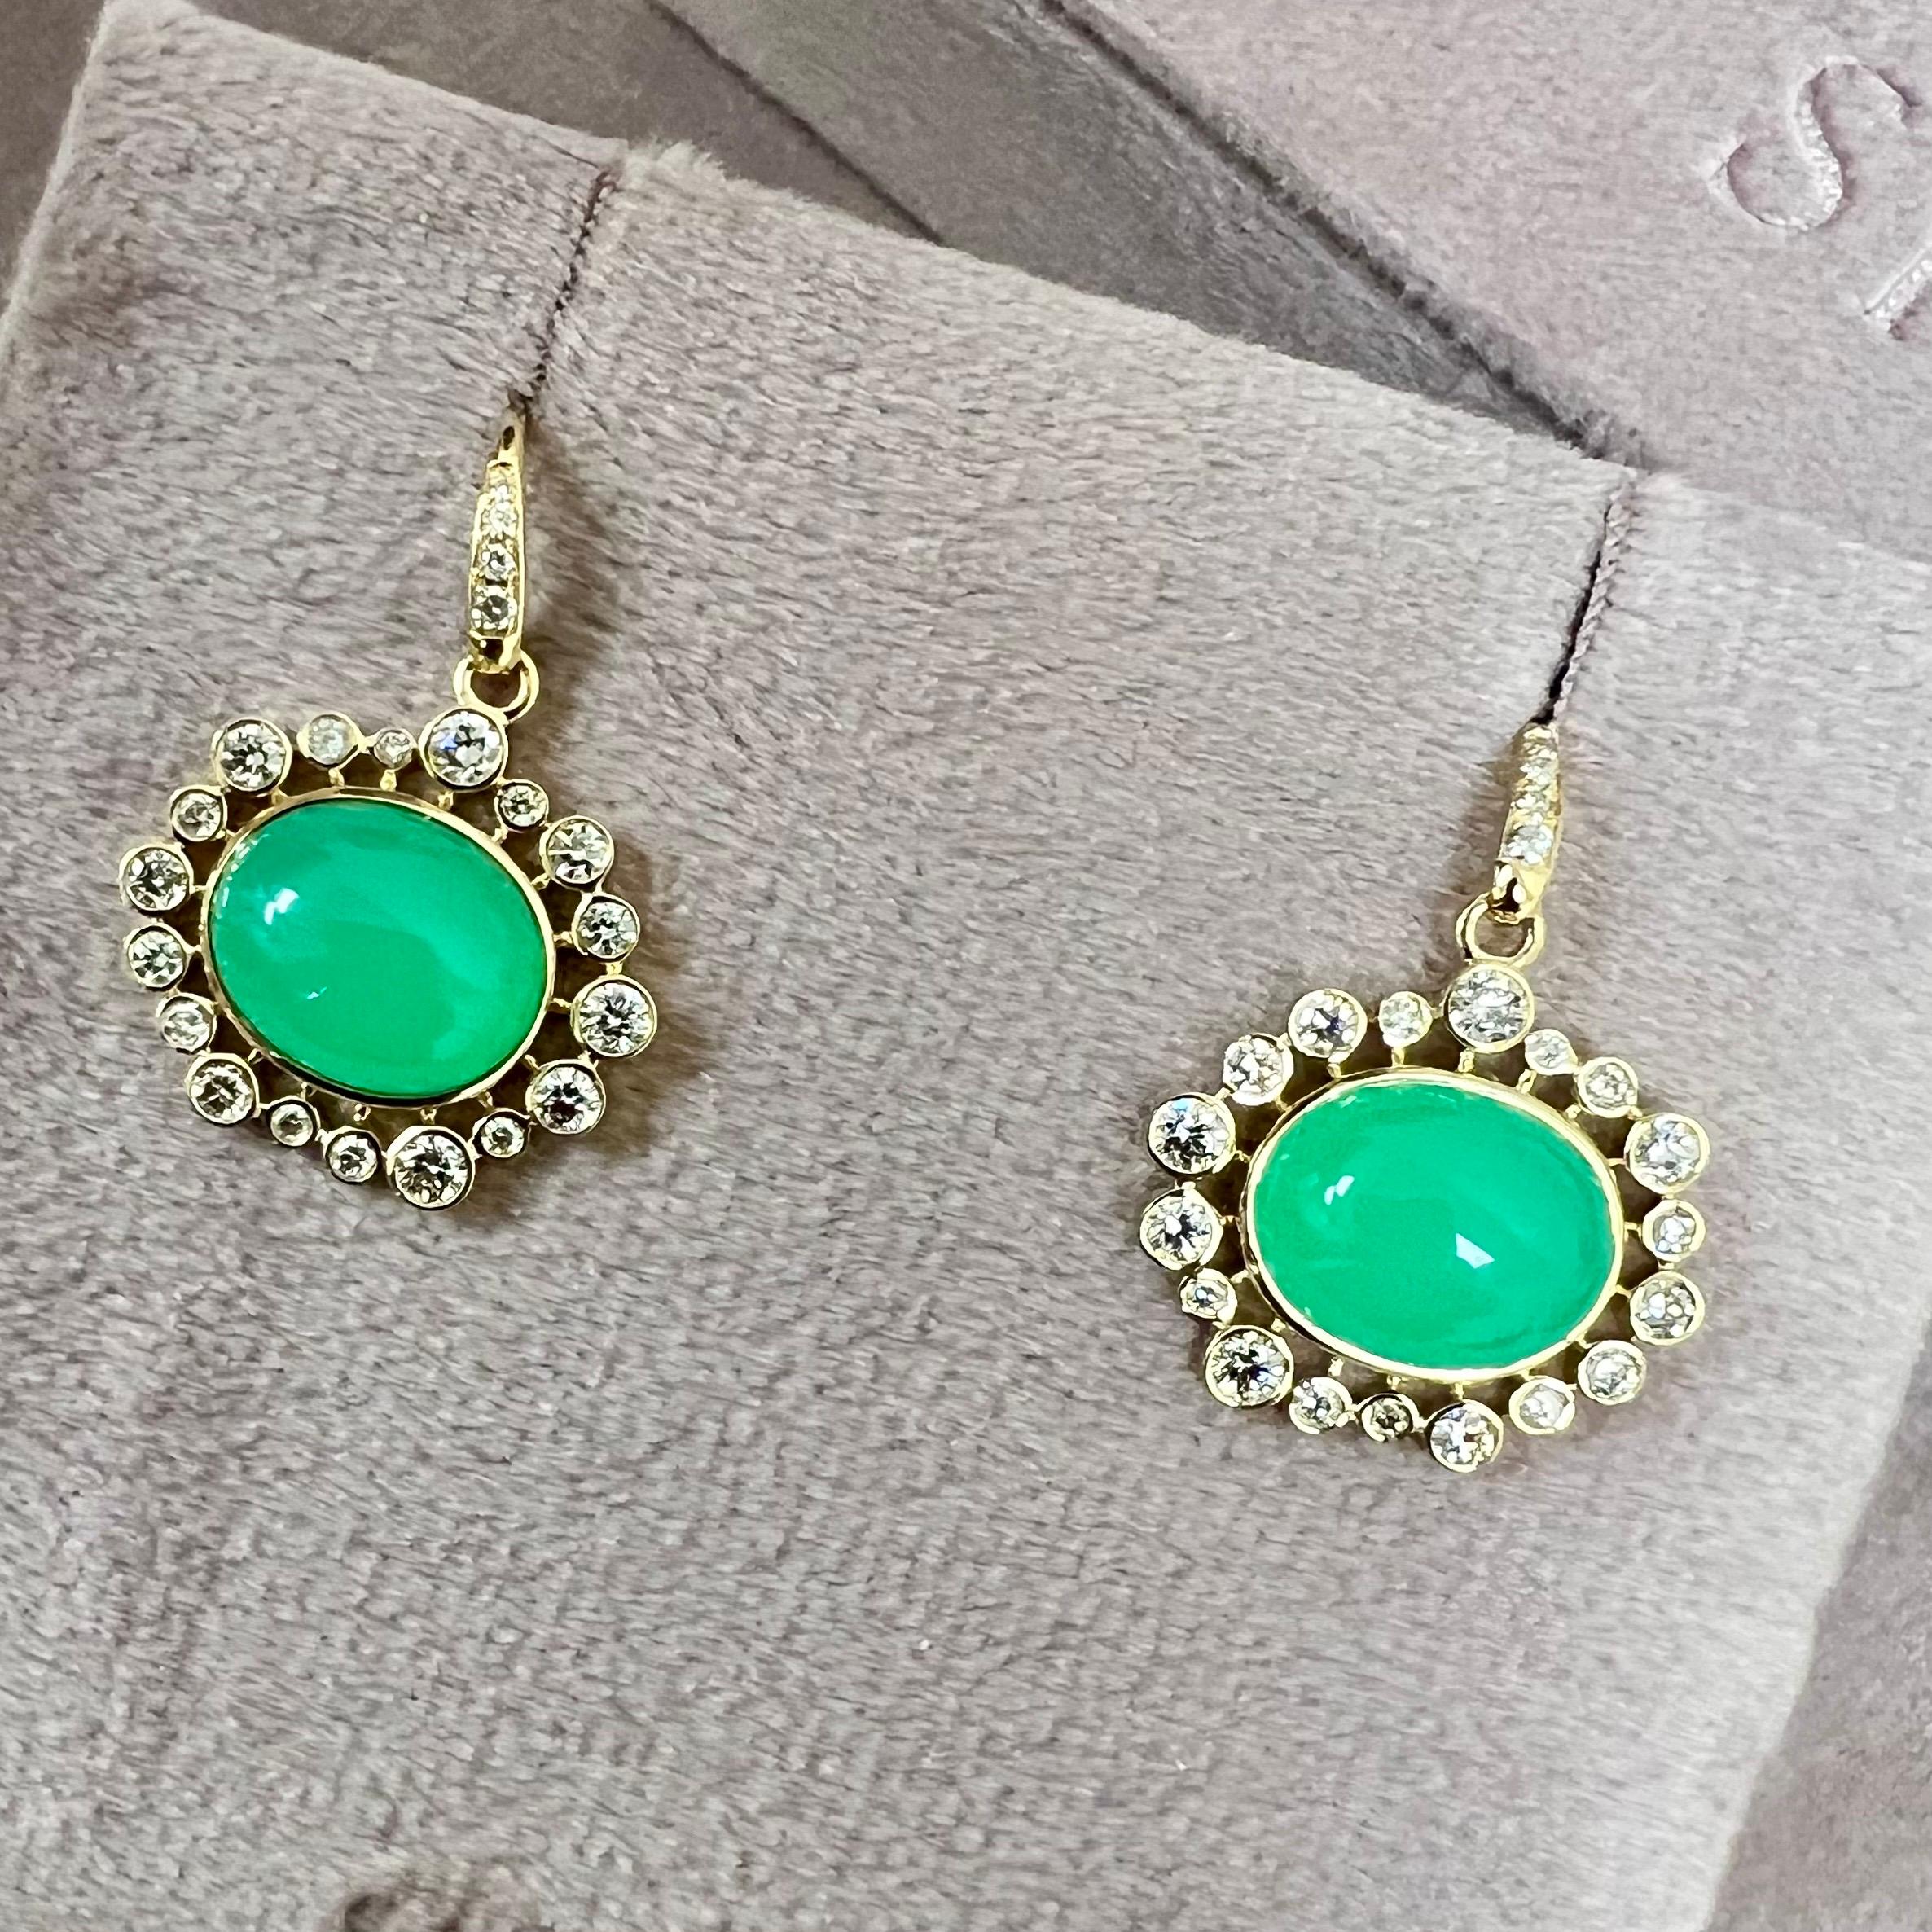 Created in 18 karat yellow gold
Chrysoprase 7.50 carats approx.
Diamonds 0.80 carat approx.
French wire for pierced ears
Limited edition



About the Designers

Drawing inspiration from little things, Dharmesh & Namrata Kothari have created an